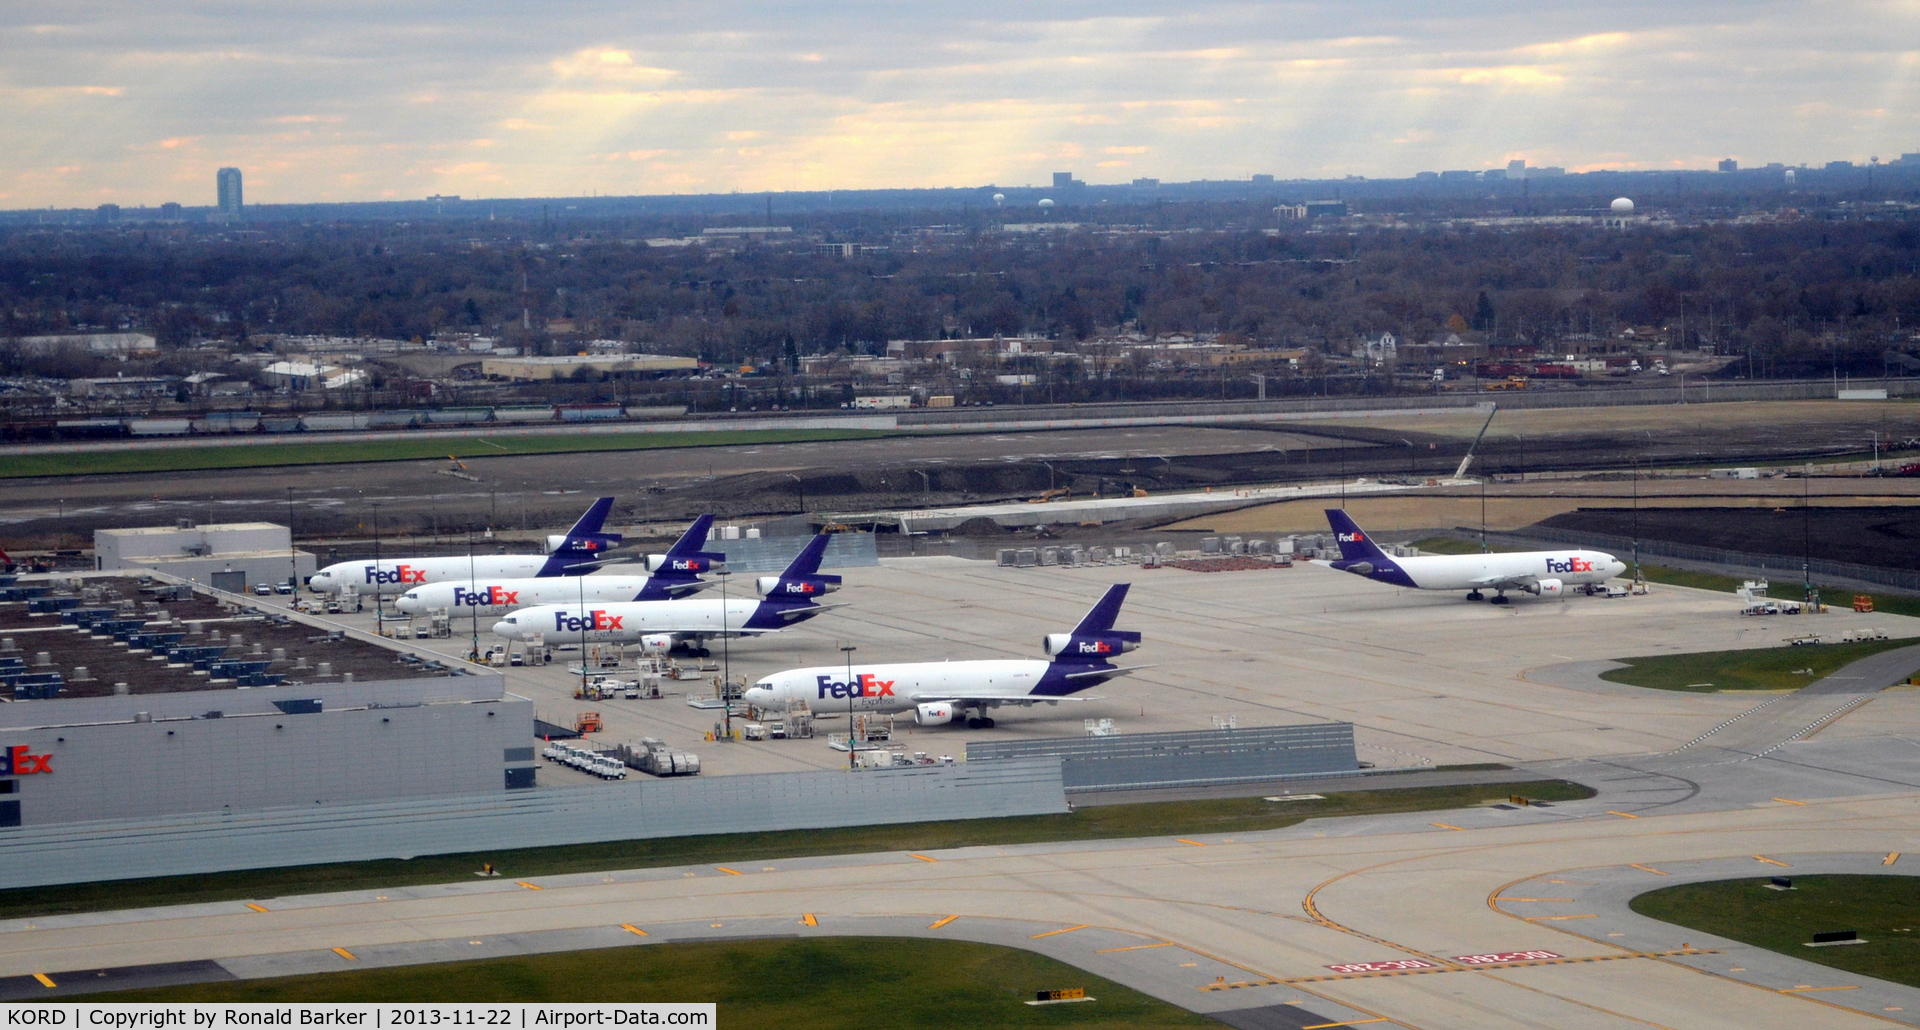 Chicago O'hare International Airport (ORD) - FedEx Cargo ramp at O'Hare